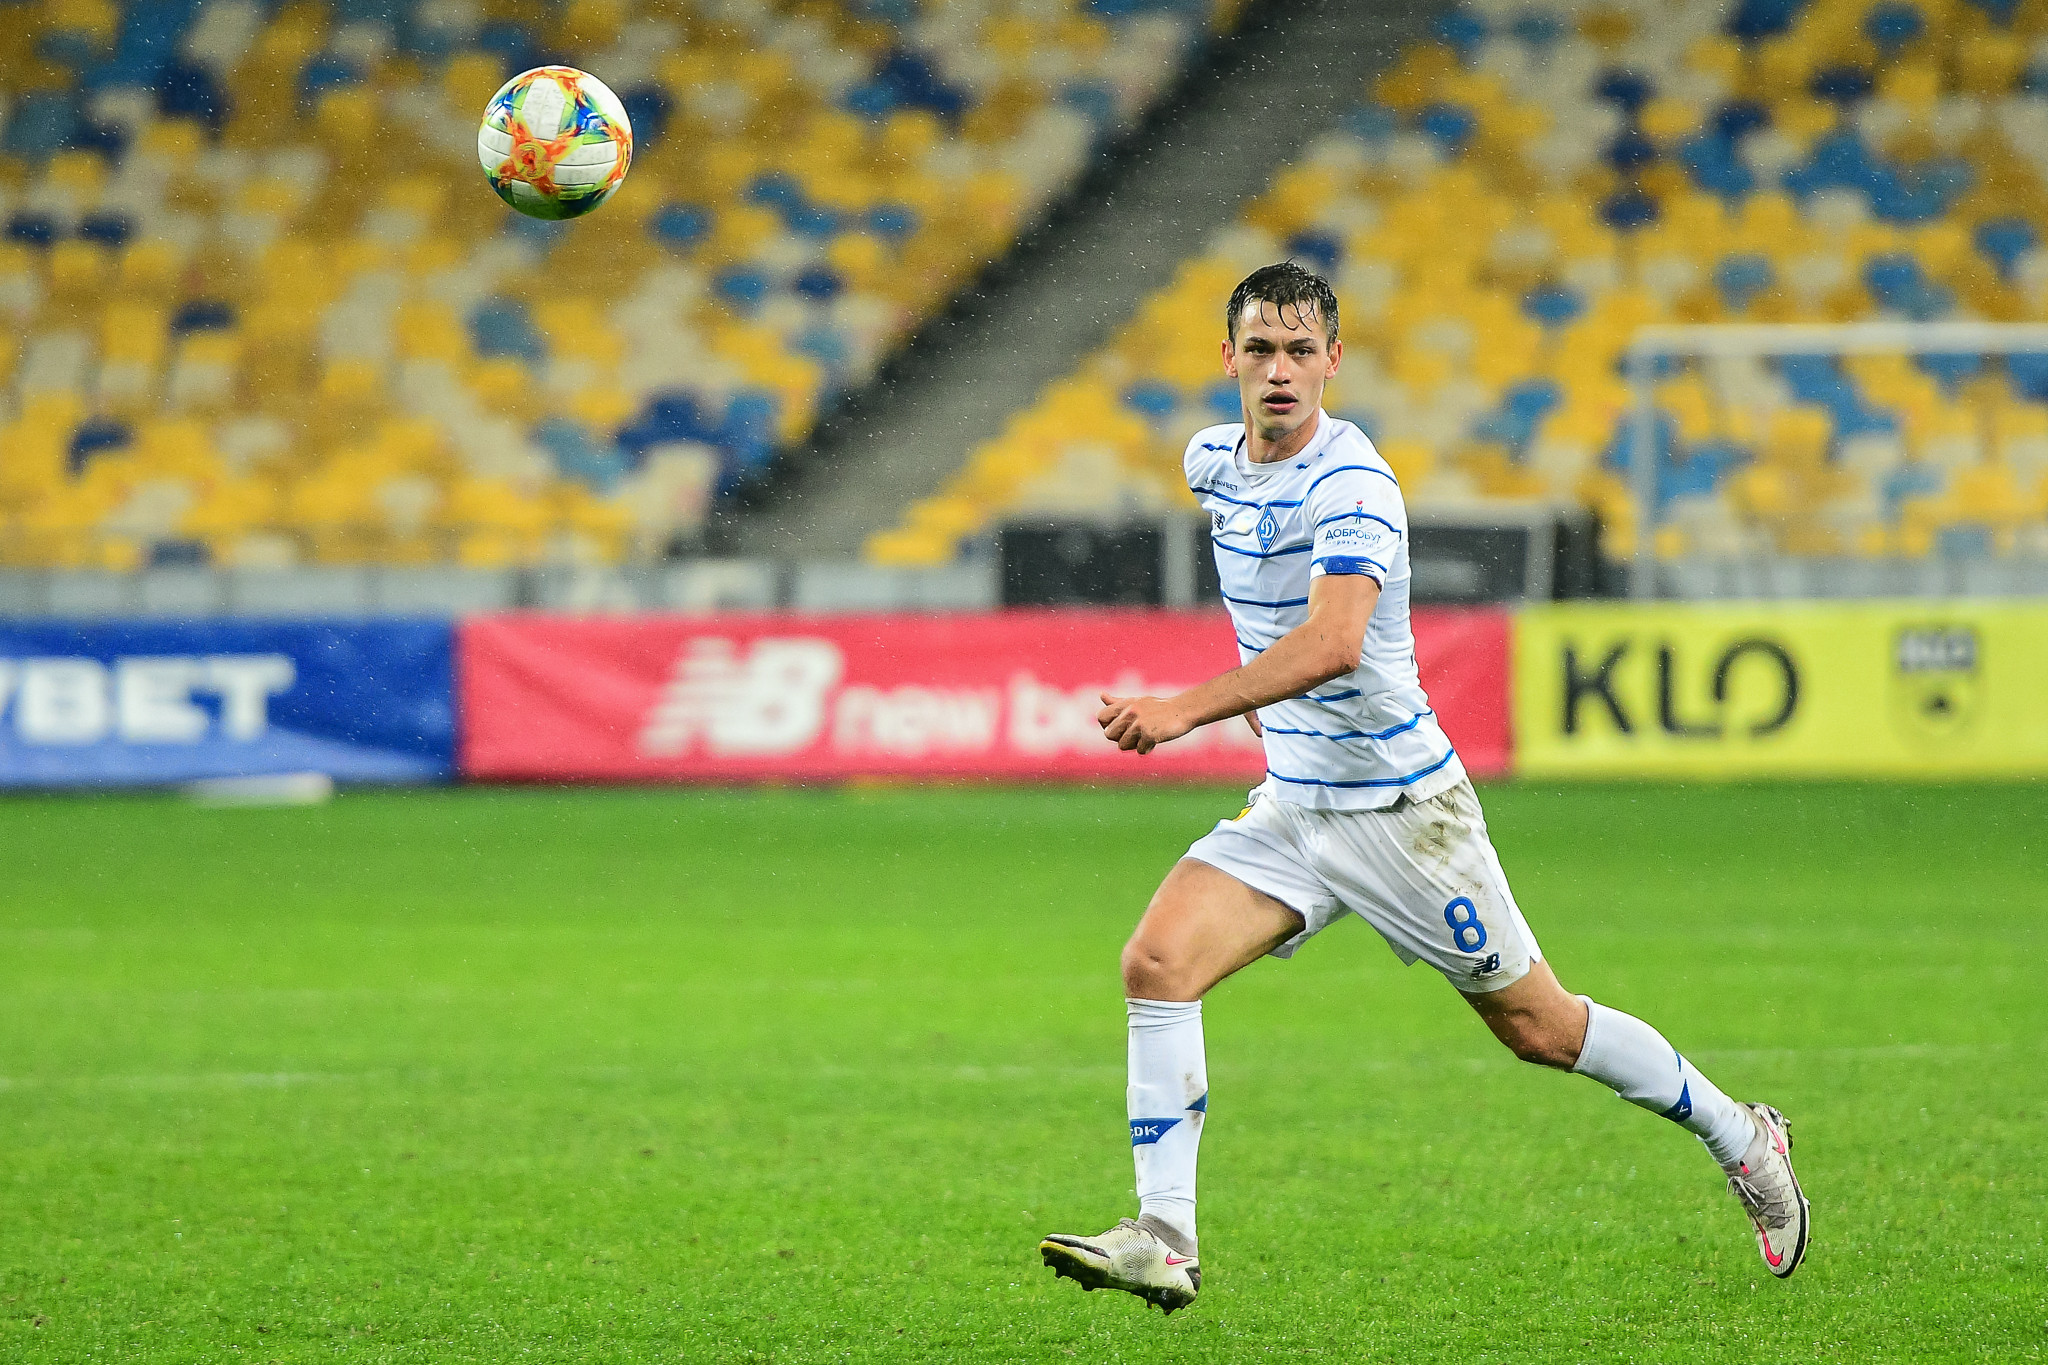 Volodymyr Shepelev: “We need to score early opener and then use counterattacks against Kolos”